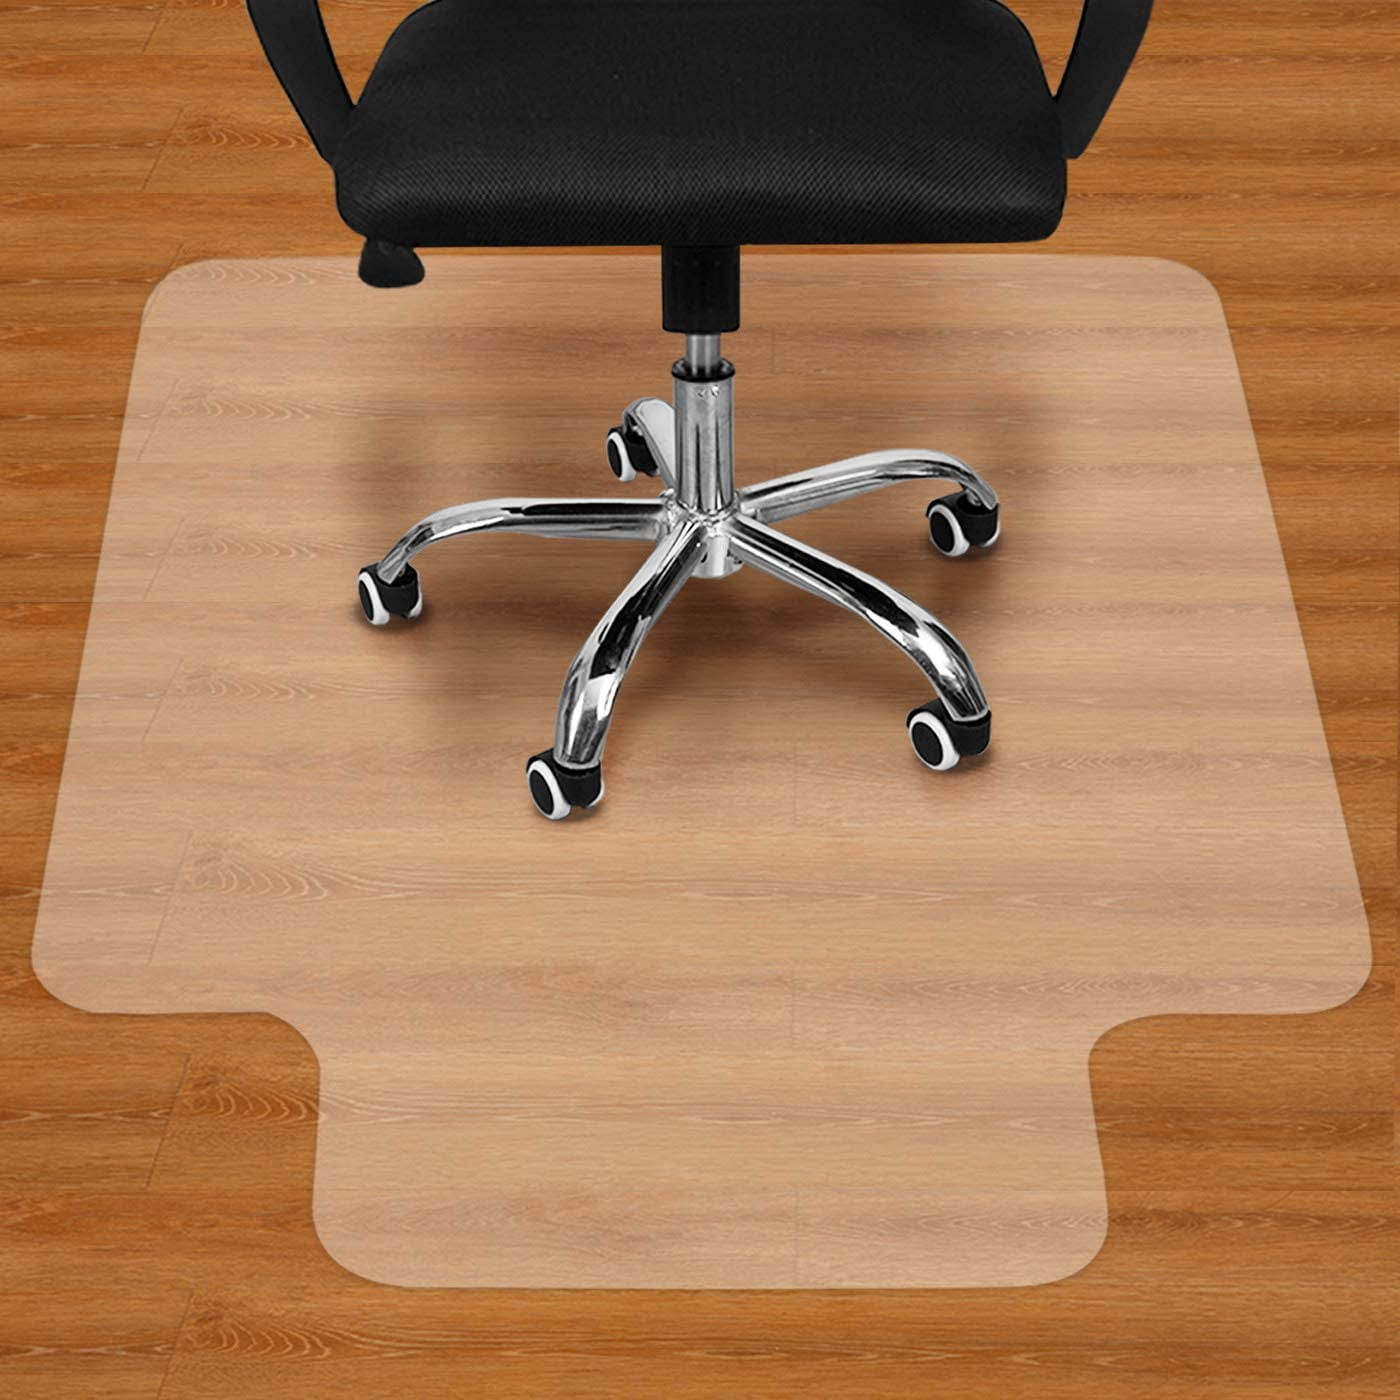 47x35Large Anti-Slip Desk Chair Rug Floor Protectors for Chairs Office Chair Mat for Hardwood Floor 47x35, Black Non-Pilling Computer Chair Mats for Home Office 